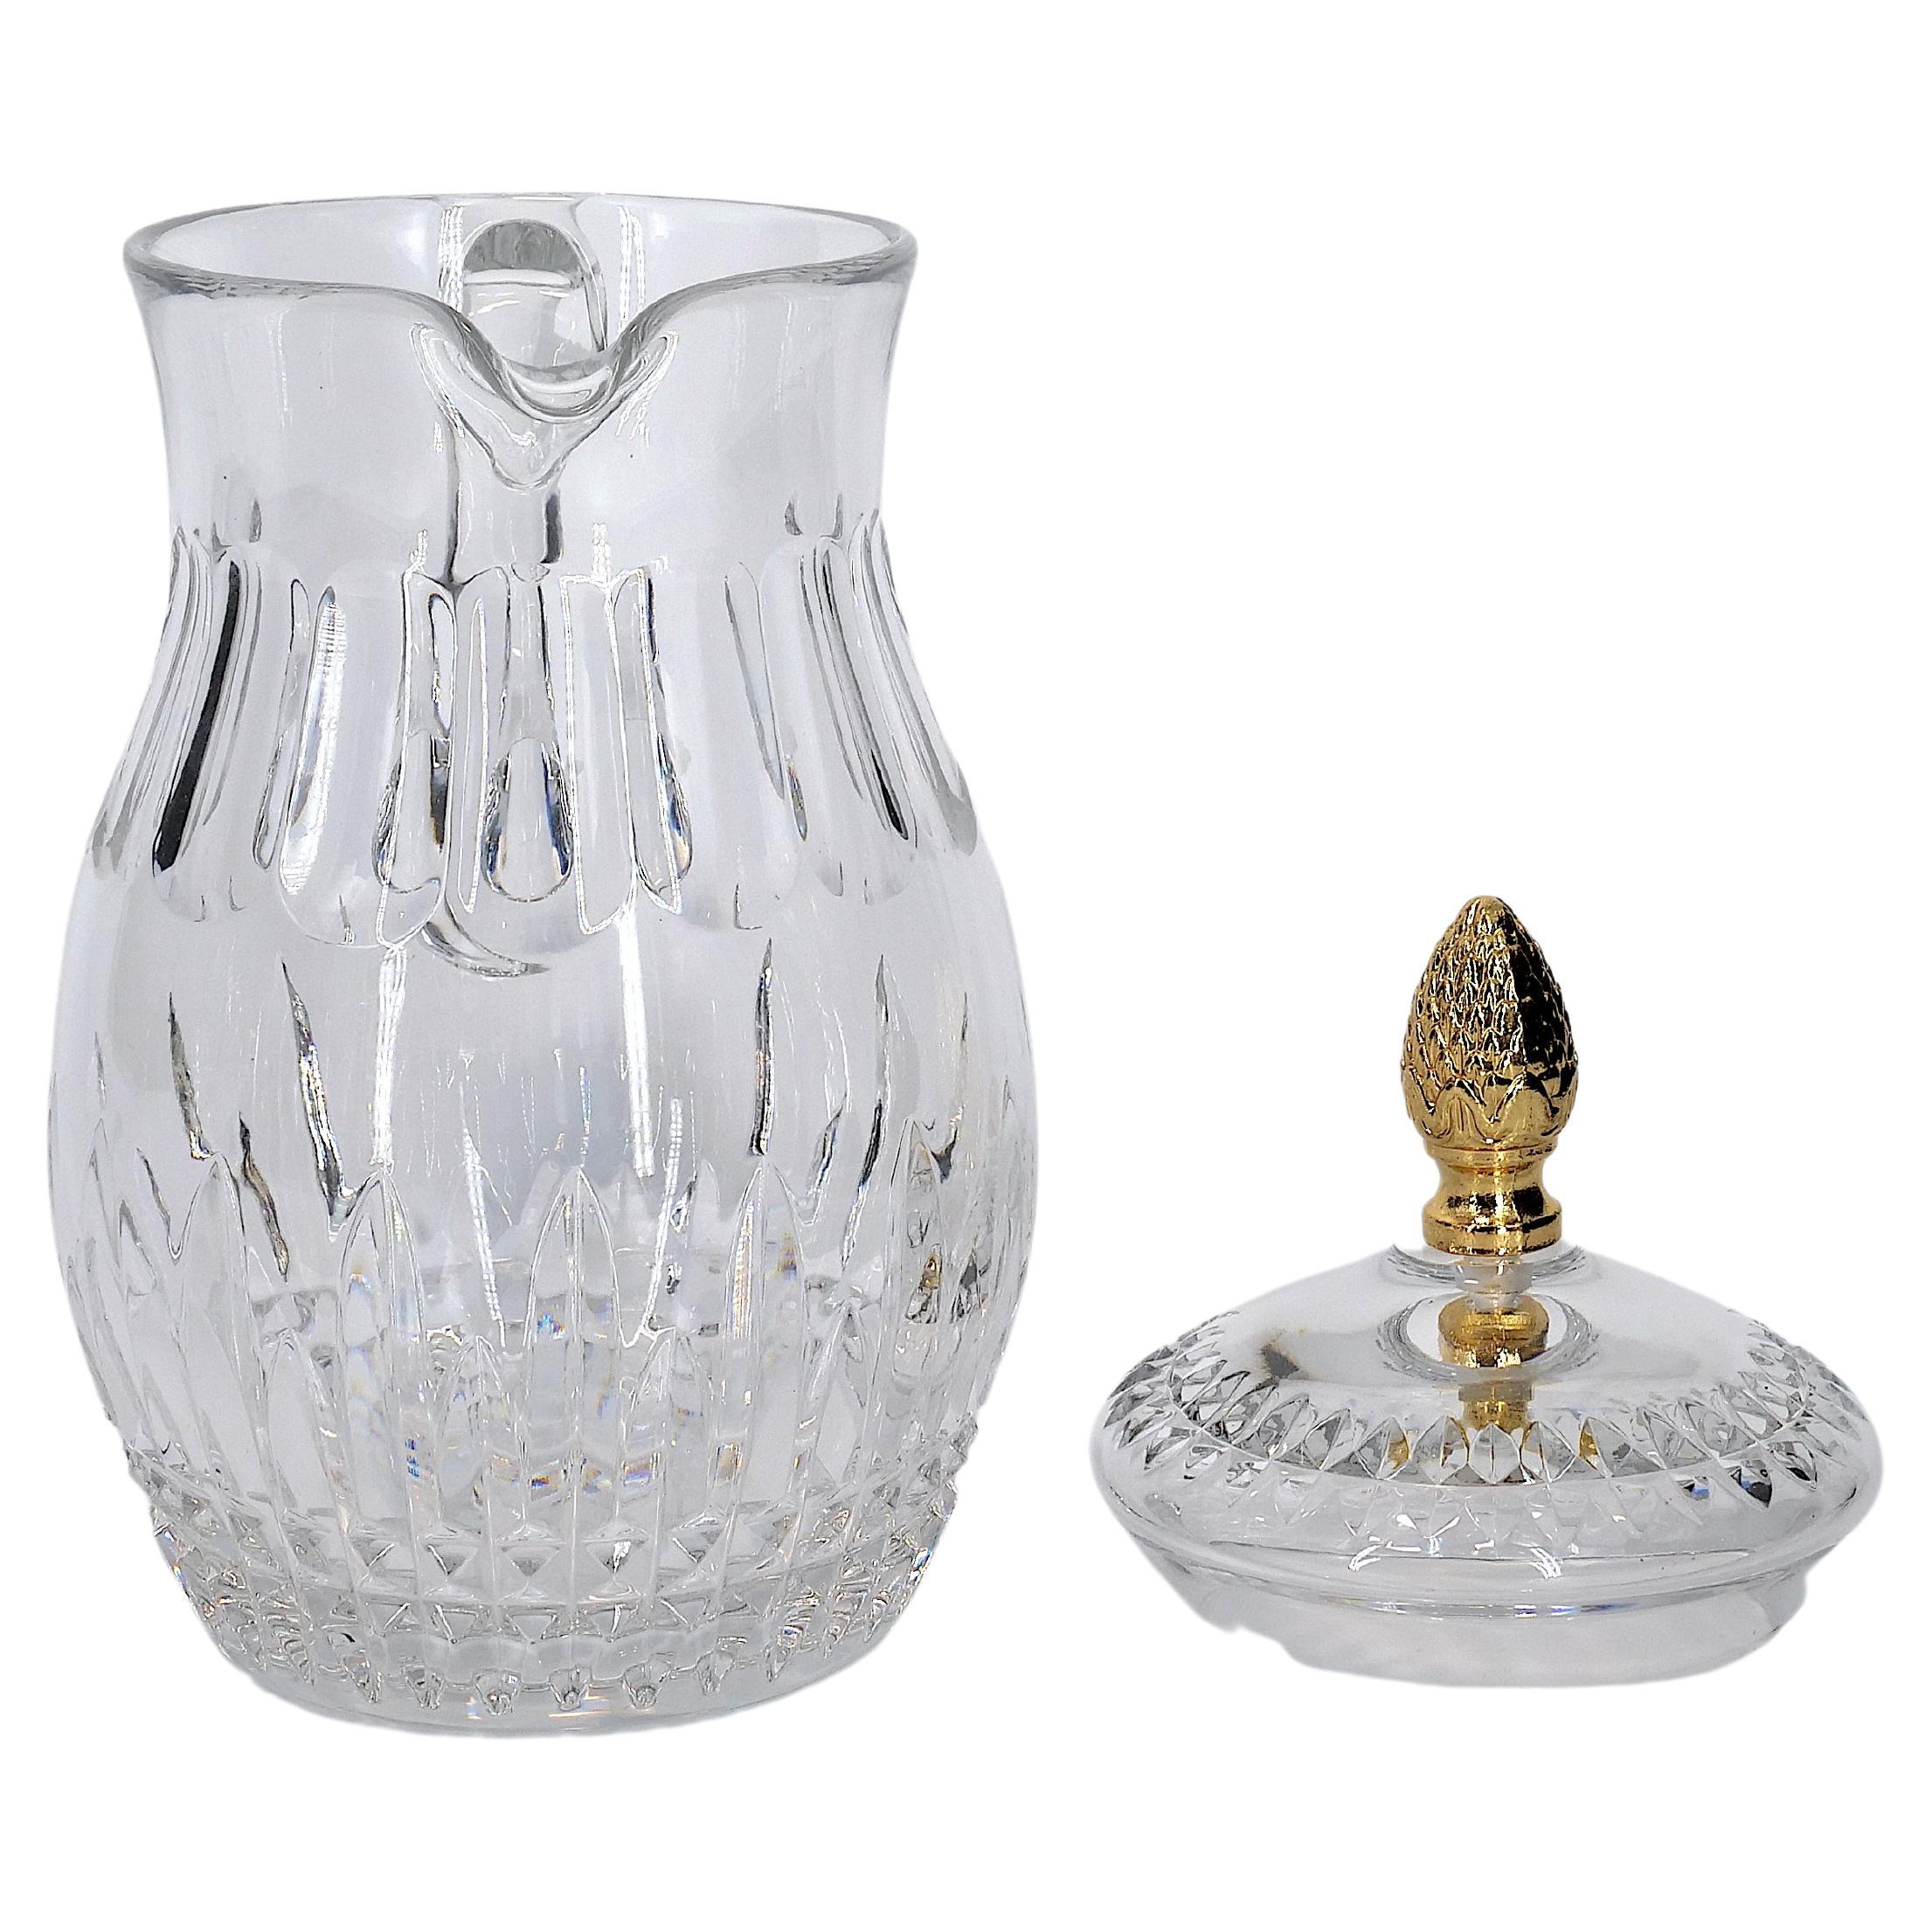 Late 20th century cut crystal tableware / barware covered serving pitcher. The piece features a gilt top brass pinecone finial covers with single side handle resting on a round shape base with exterior cut crystal design details. The pitcher is in